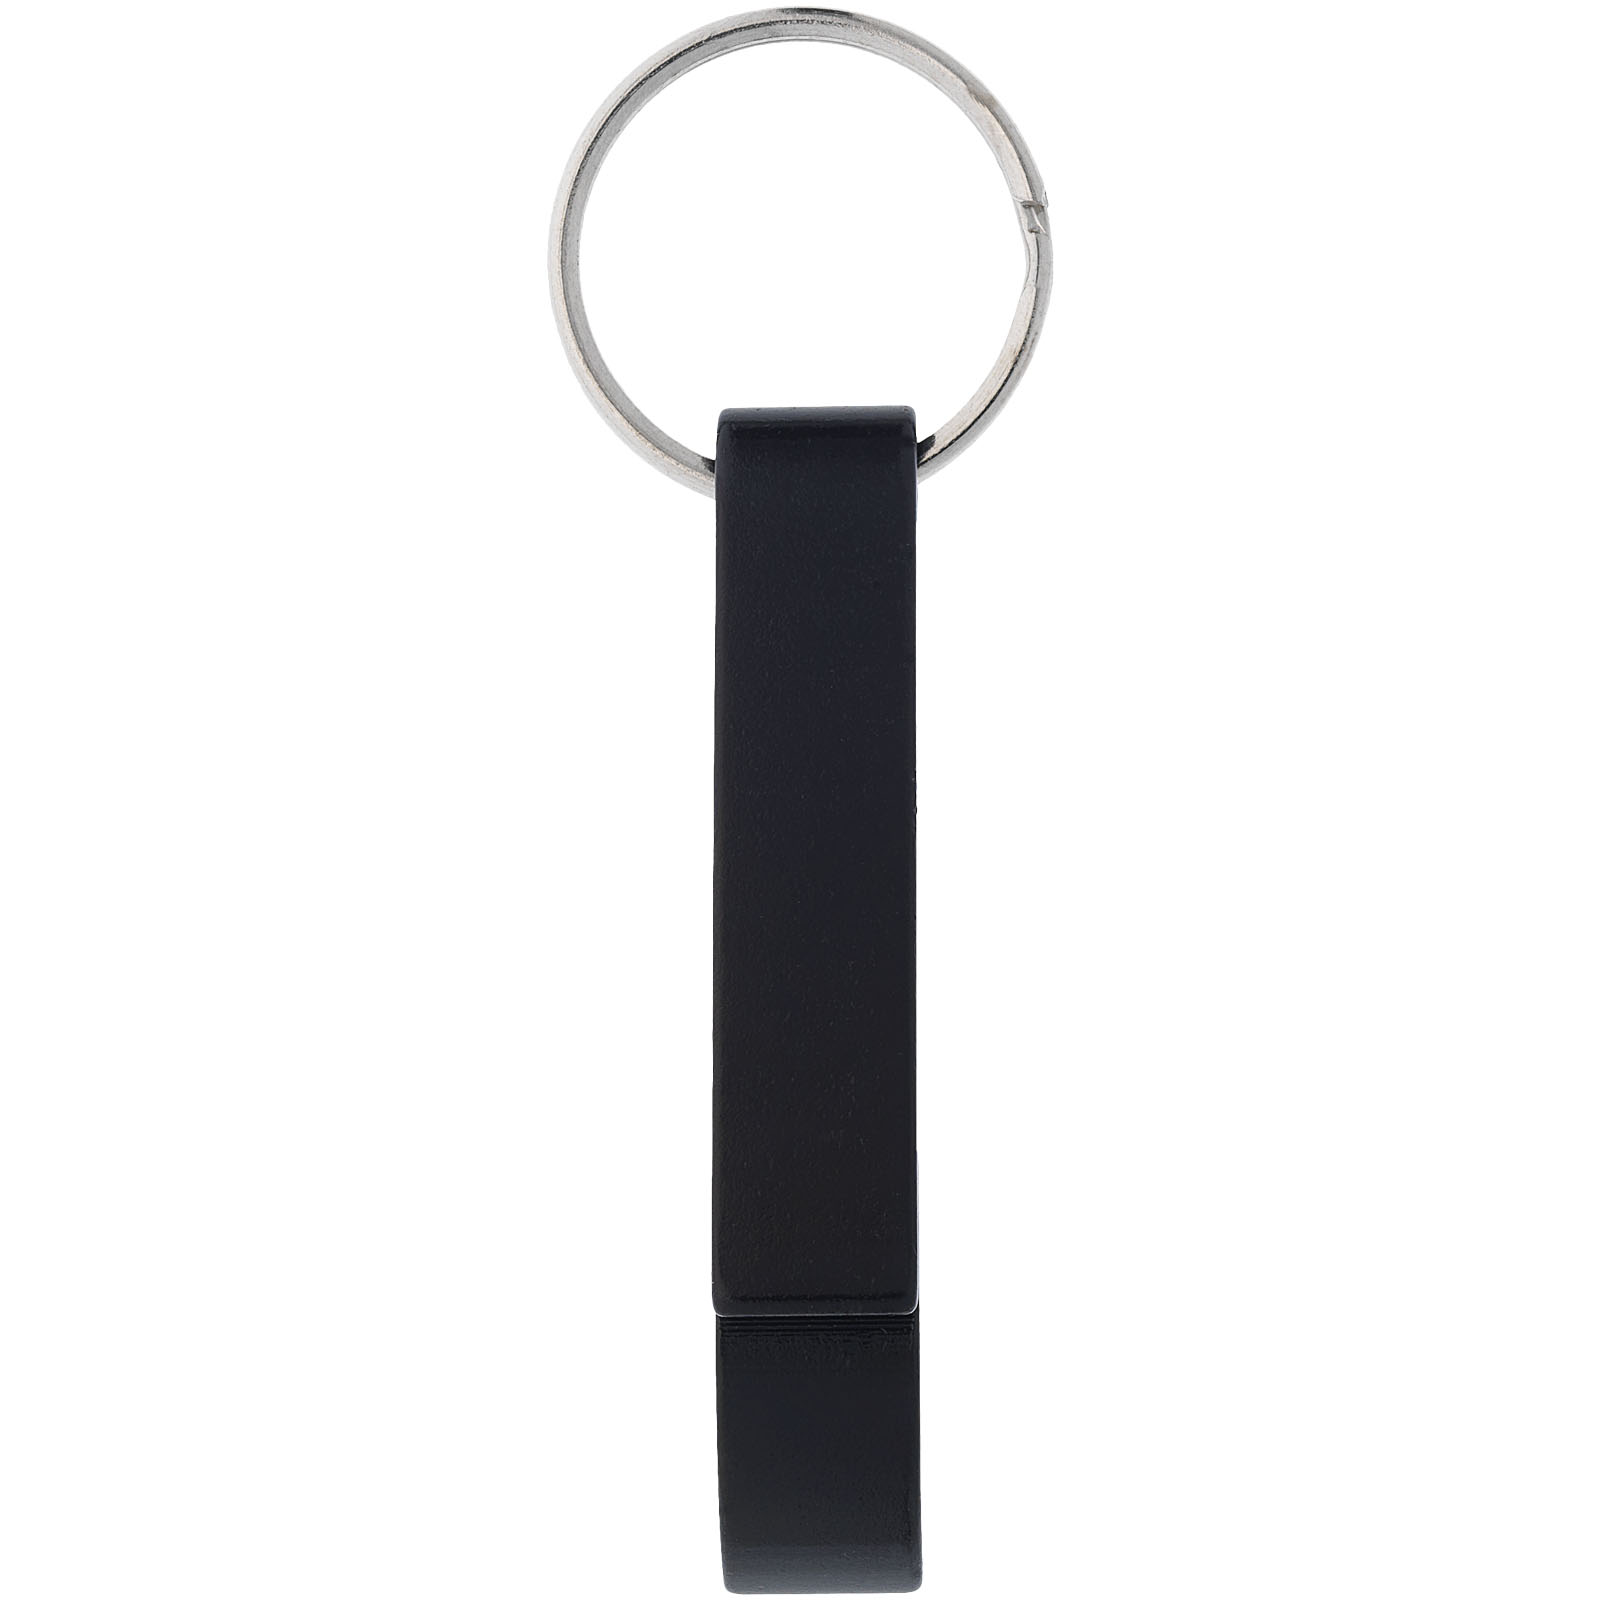 Advertising Bottle Openers & Accessories - Tao bottle and can opener keychain - 1